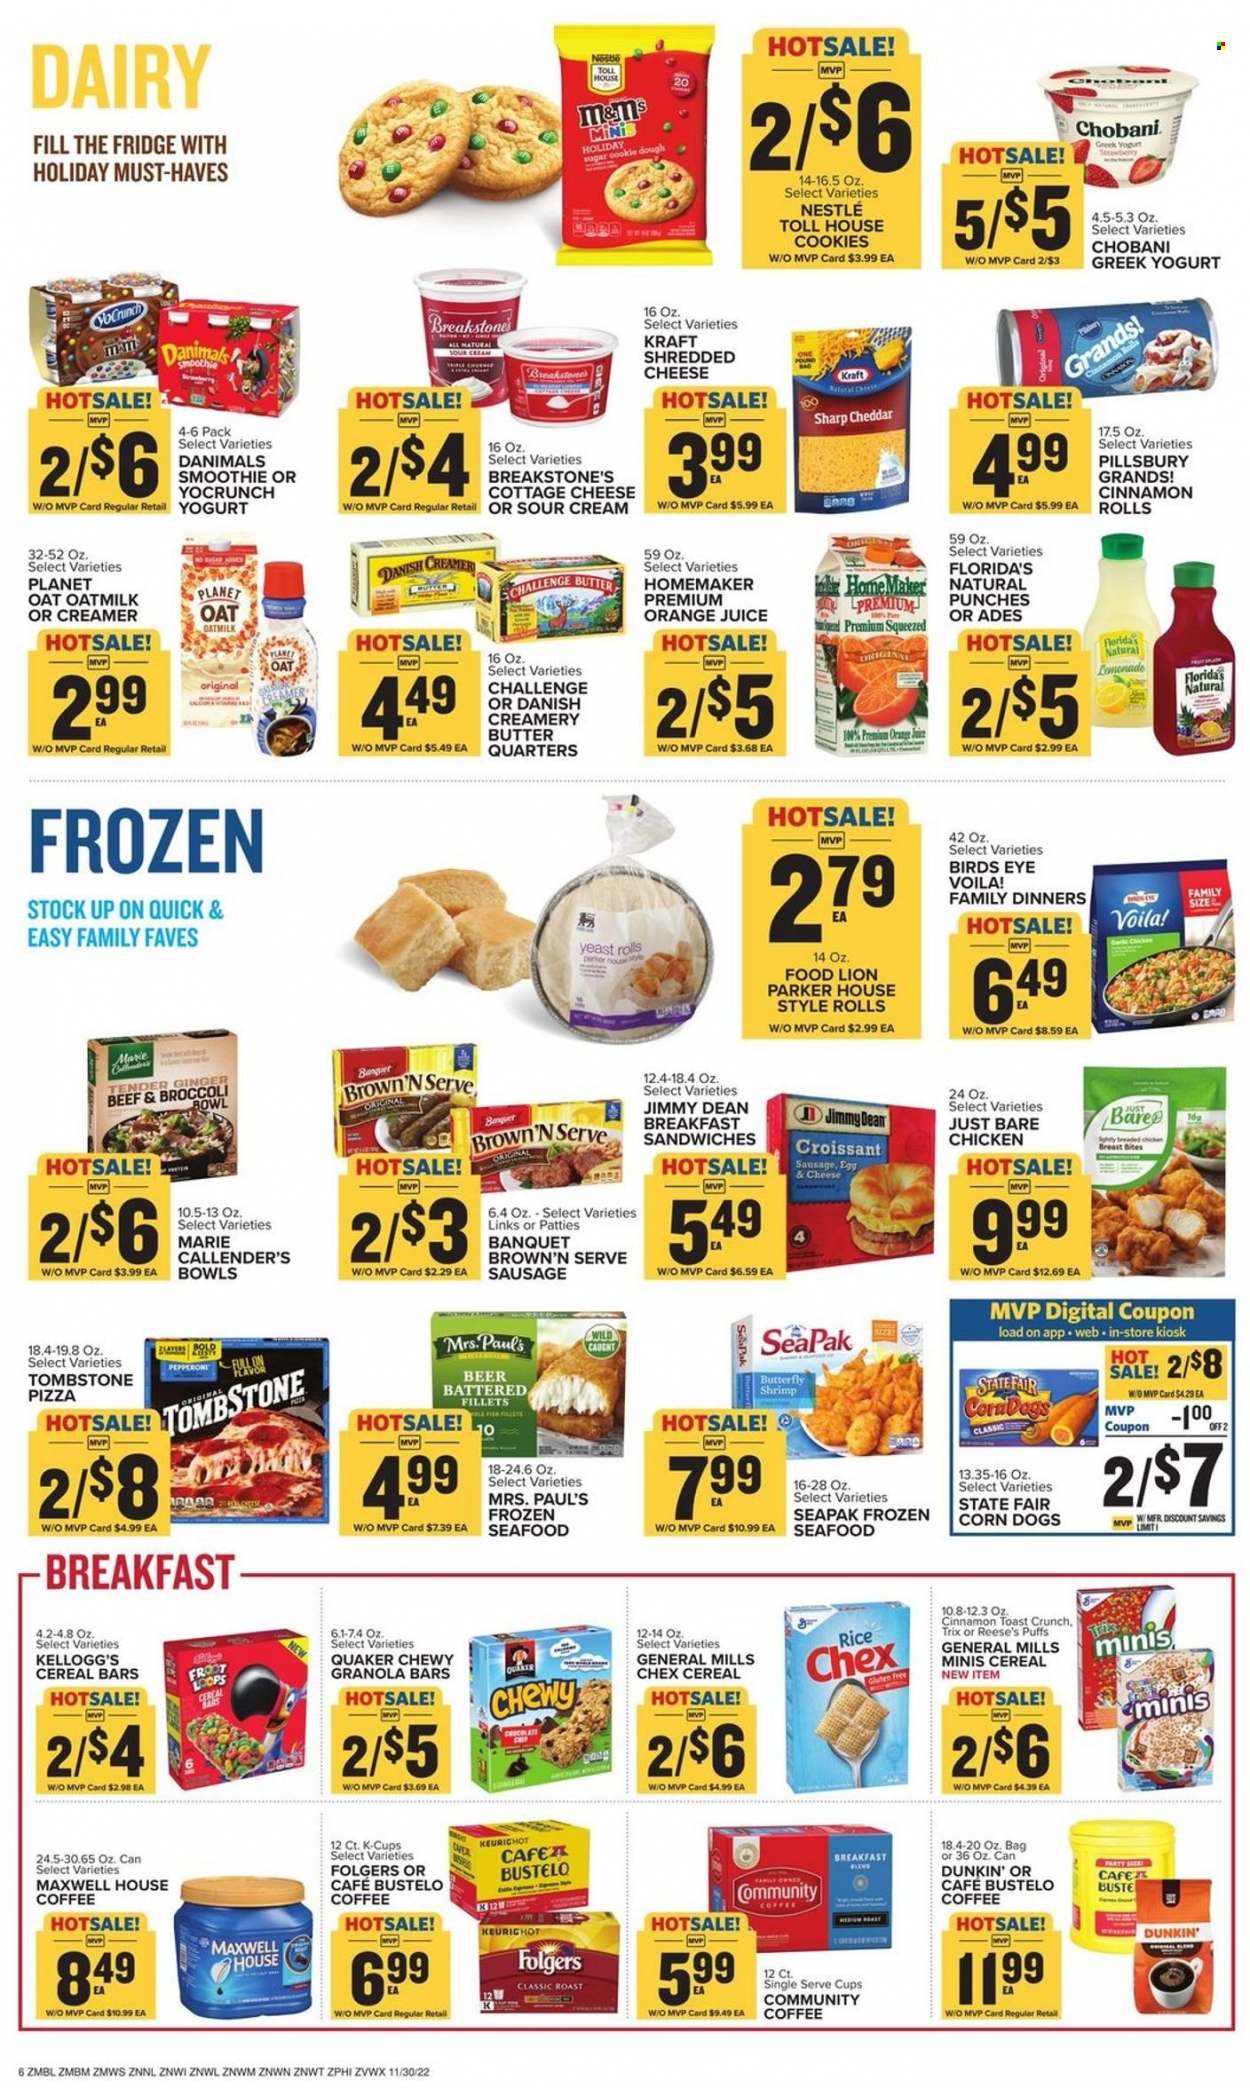 thumbnail - Food Lion Flyer - 11/30/2022 - 12/06/2022 - Sales products - cinnamon roll, puffs, broccoli, ginger, fish fillets, seafood, fish, shrimps, pizza, fried chicken, Pillsbury, Bird's Eye, Quaker, Marie Callender's, Kraft®, Jimmy Dean, sausage, pepperoni, cottage cheese, shredded cheese, cheddar, greek yoghurt, yoghurt, Chobani, Danimals, oat milk, eggs, yeast, butter, sour cream, creamer, Reese's, cookie dough, cookies, Nestlé, chocolate, M&M's, cereal bar, Kellogg's, Florida's Natural, sugar, cereals, granola bar, Trix, rice, lemonade, orange juice, juice, smoothie, Maxwell House, coffee, Folgers, coffee capsules, K-Cups, breakfast blend, beer, bin, bowl, Parker. Page 6.